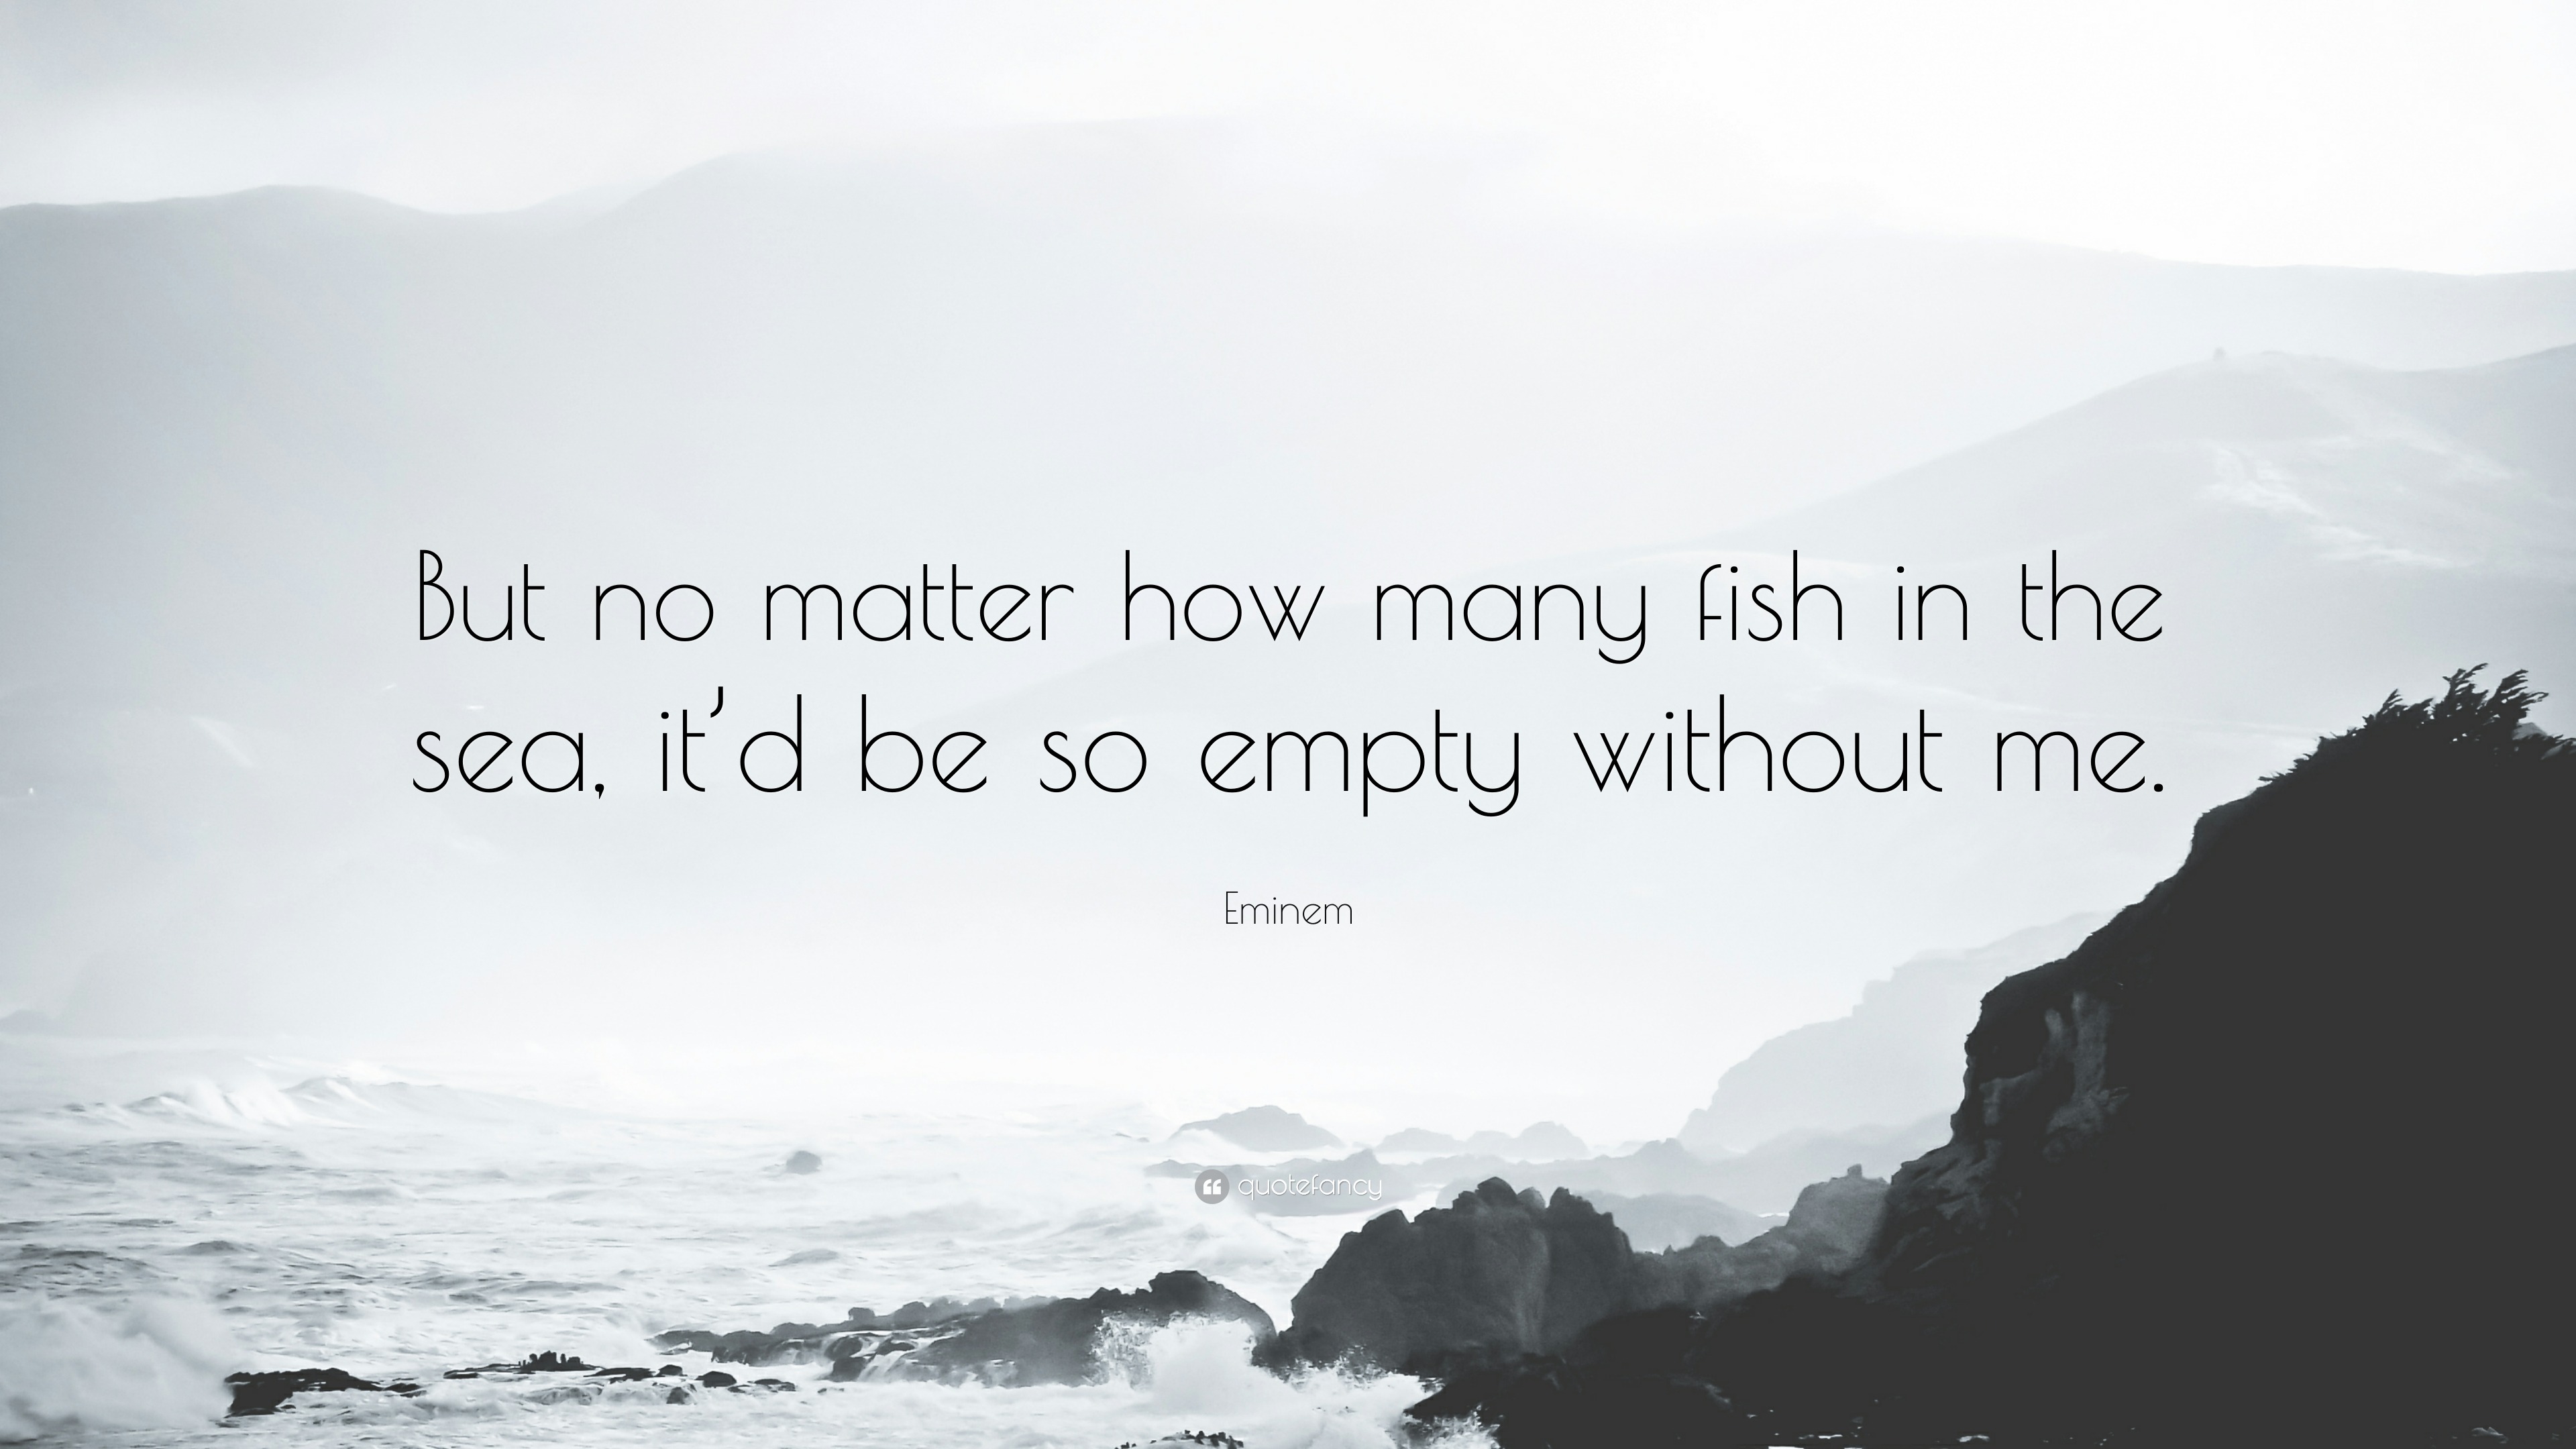 eminem quote: “but no matter how many fish in the sea, itd be so